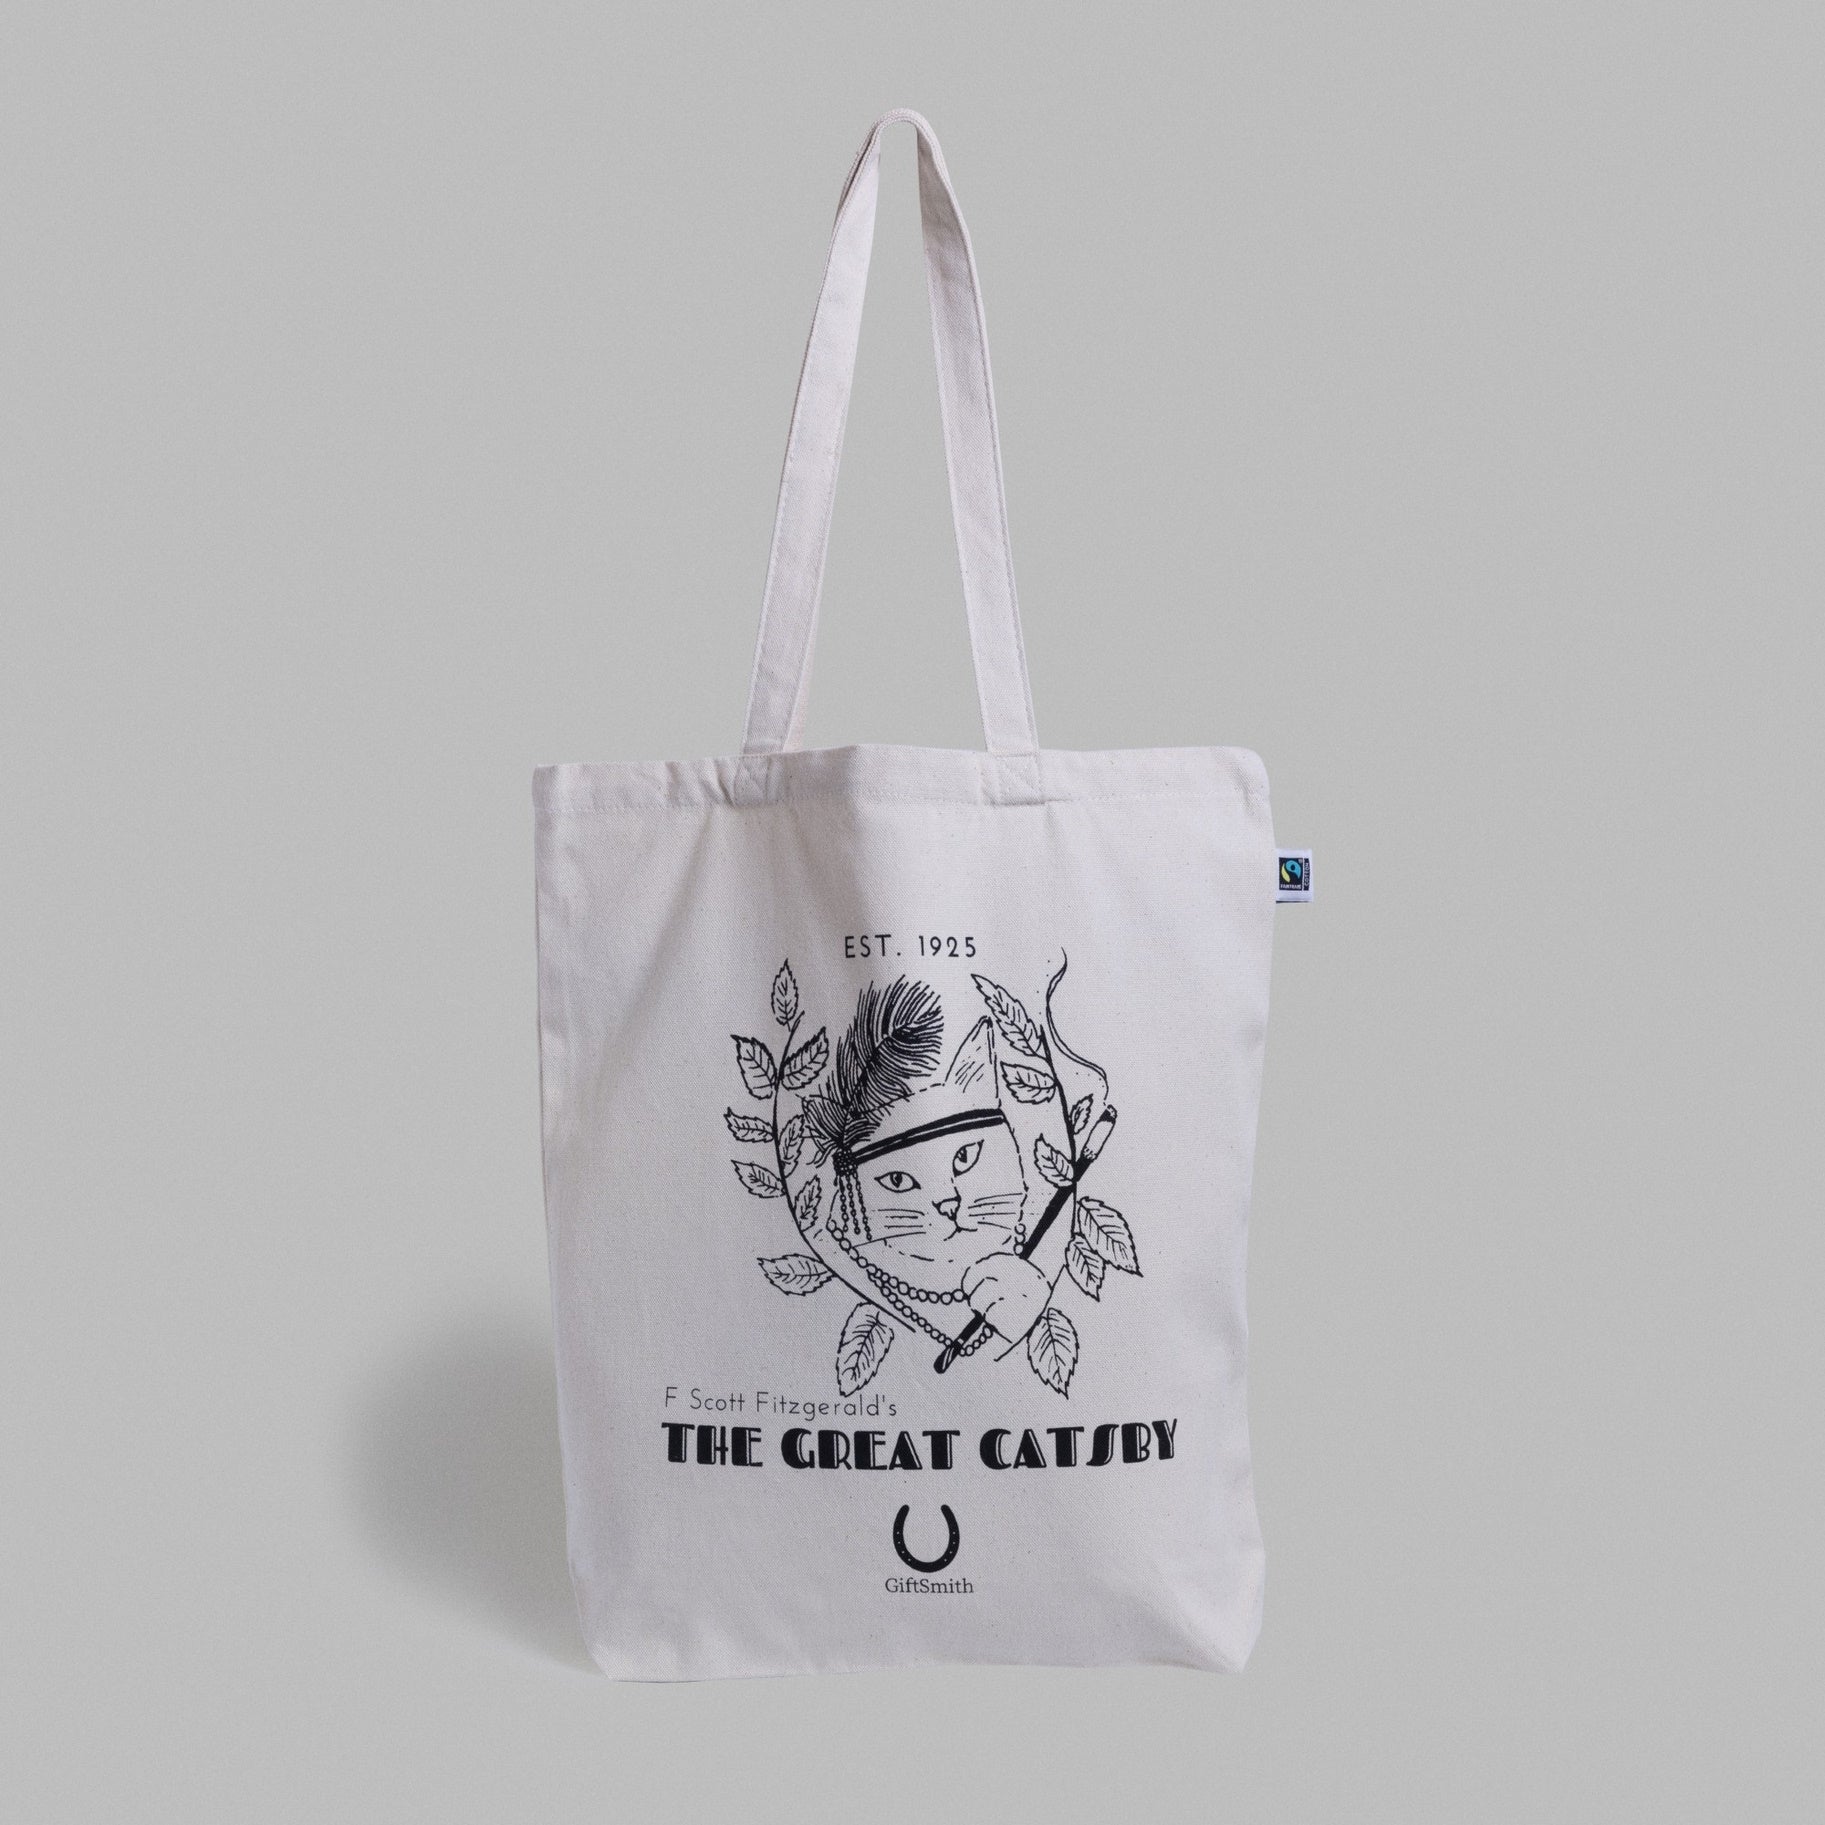 The Great Catsby Fairtrade Organic Tote Bag